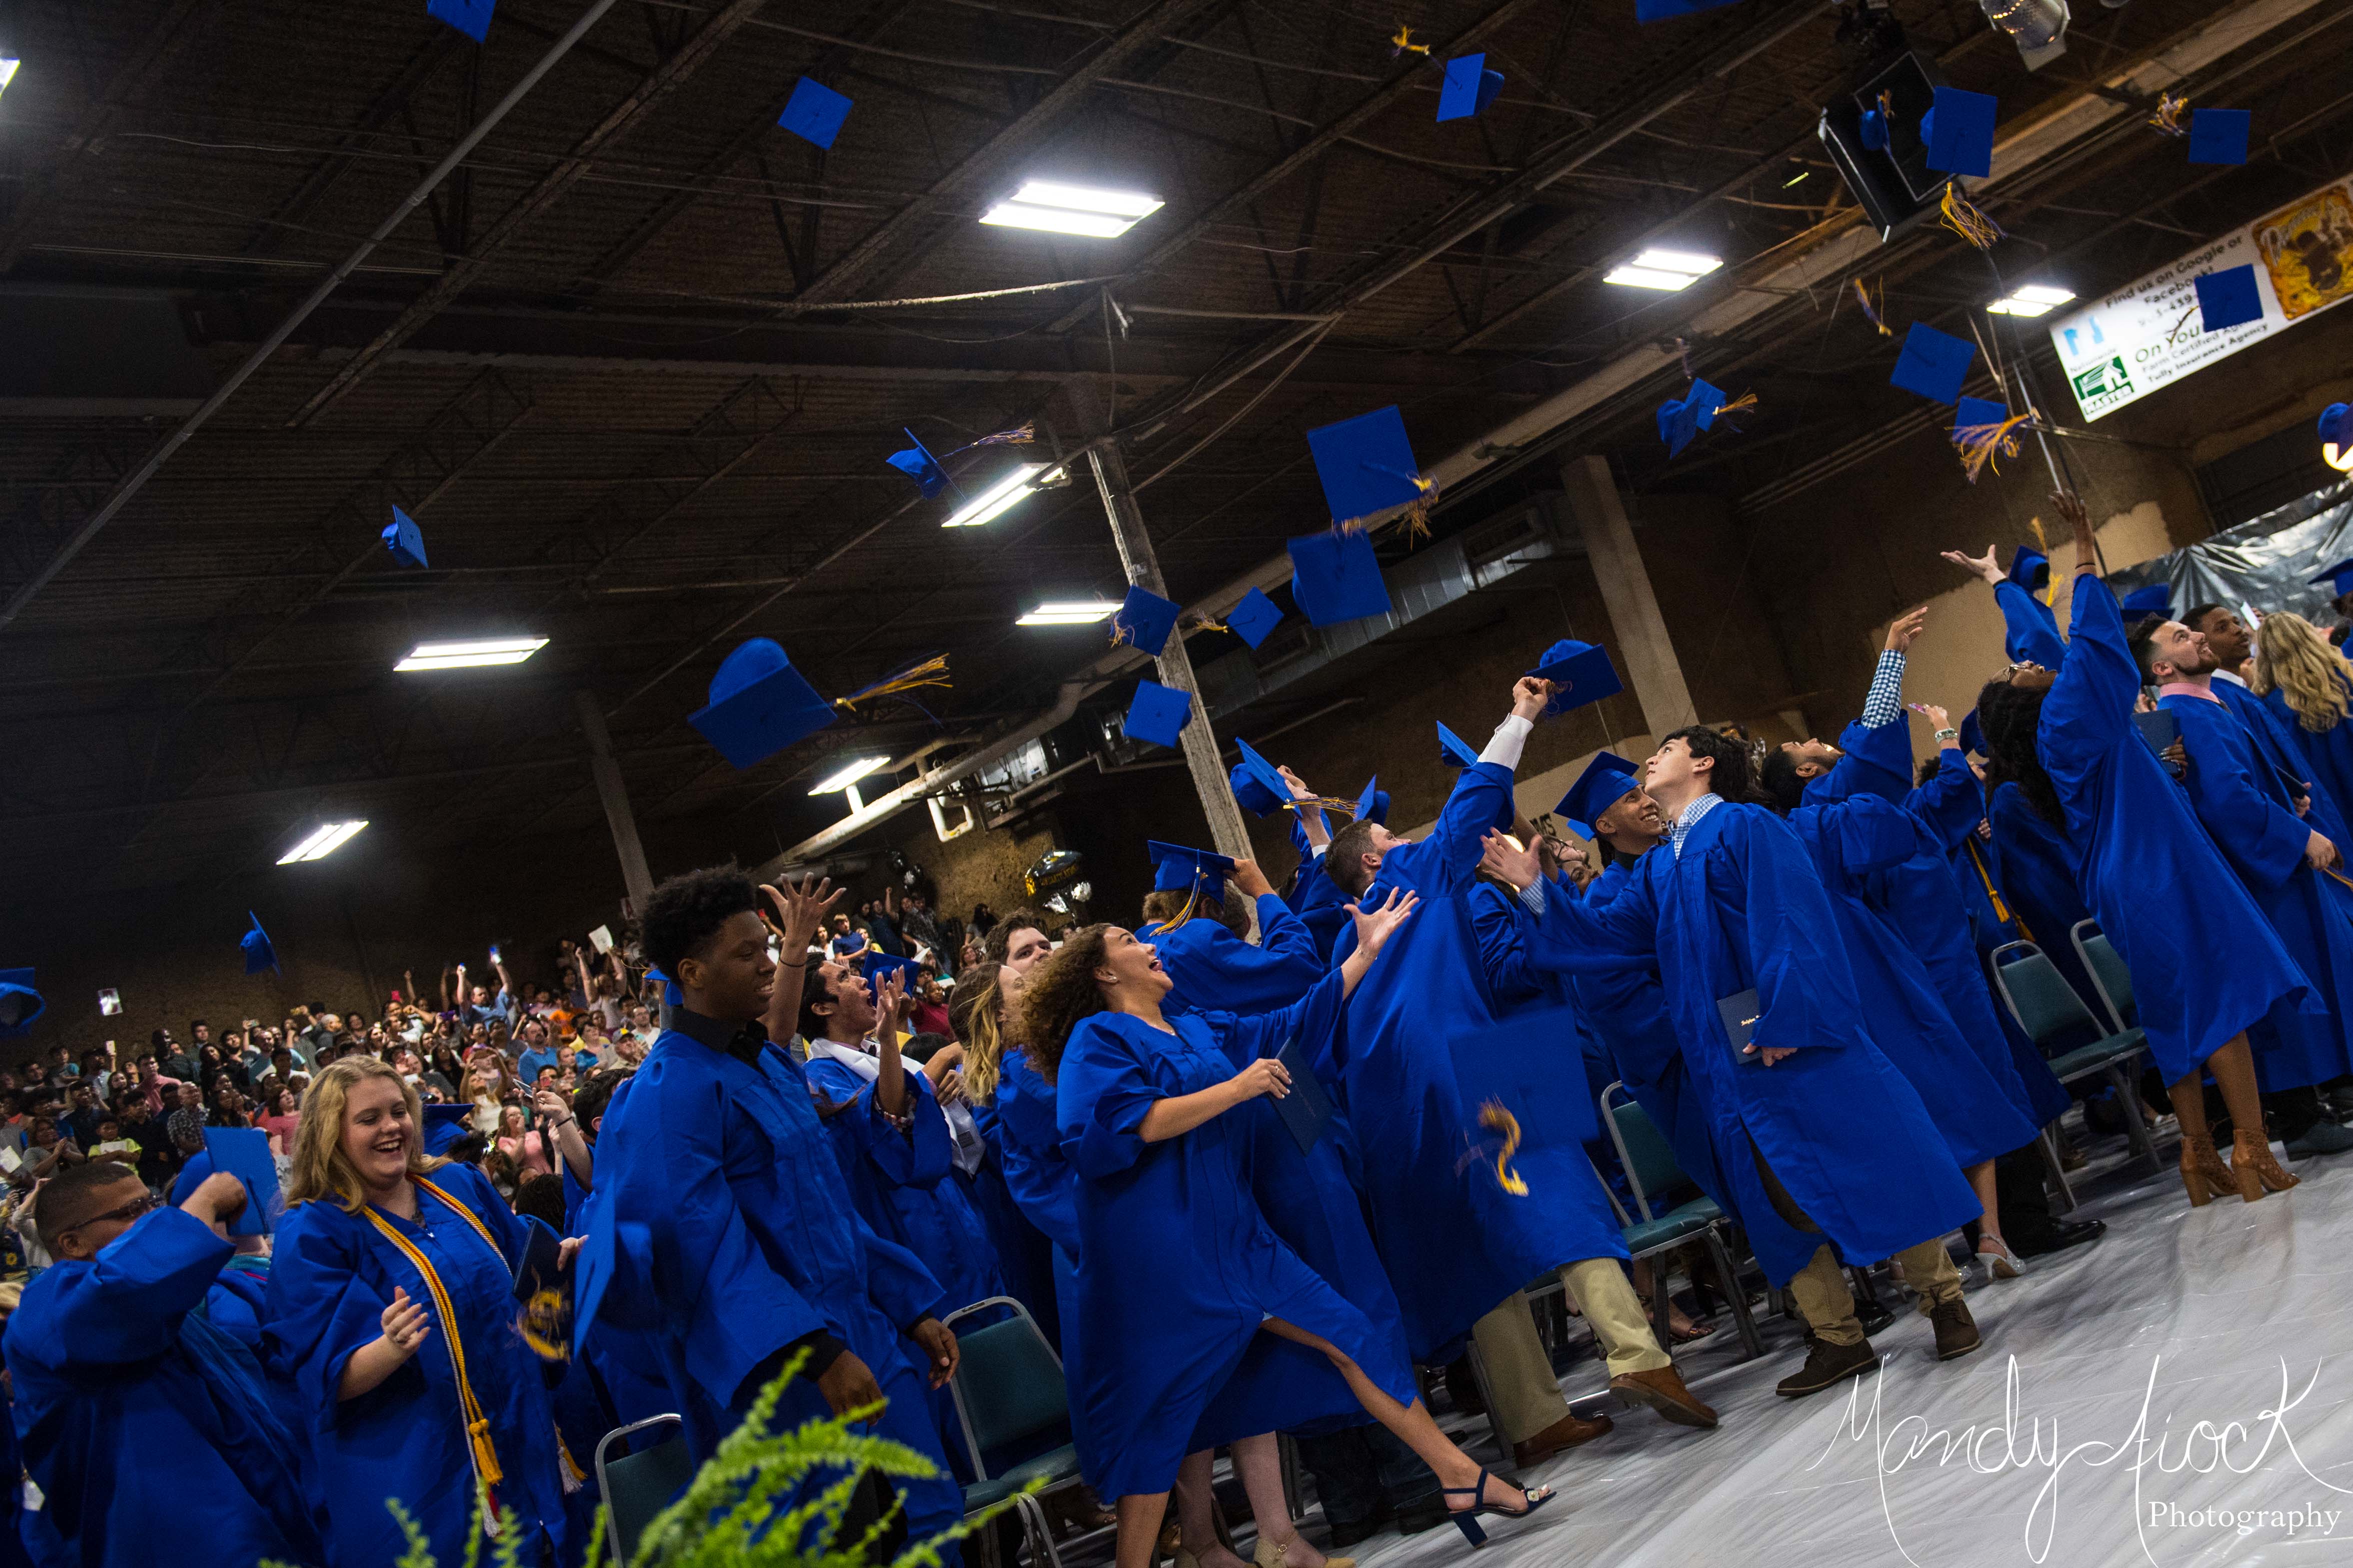 Texas outlines guidelines to allow socially distant graduations to resume